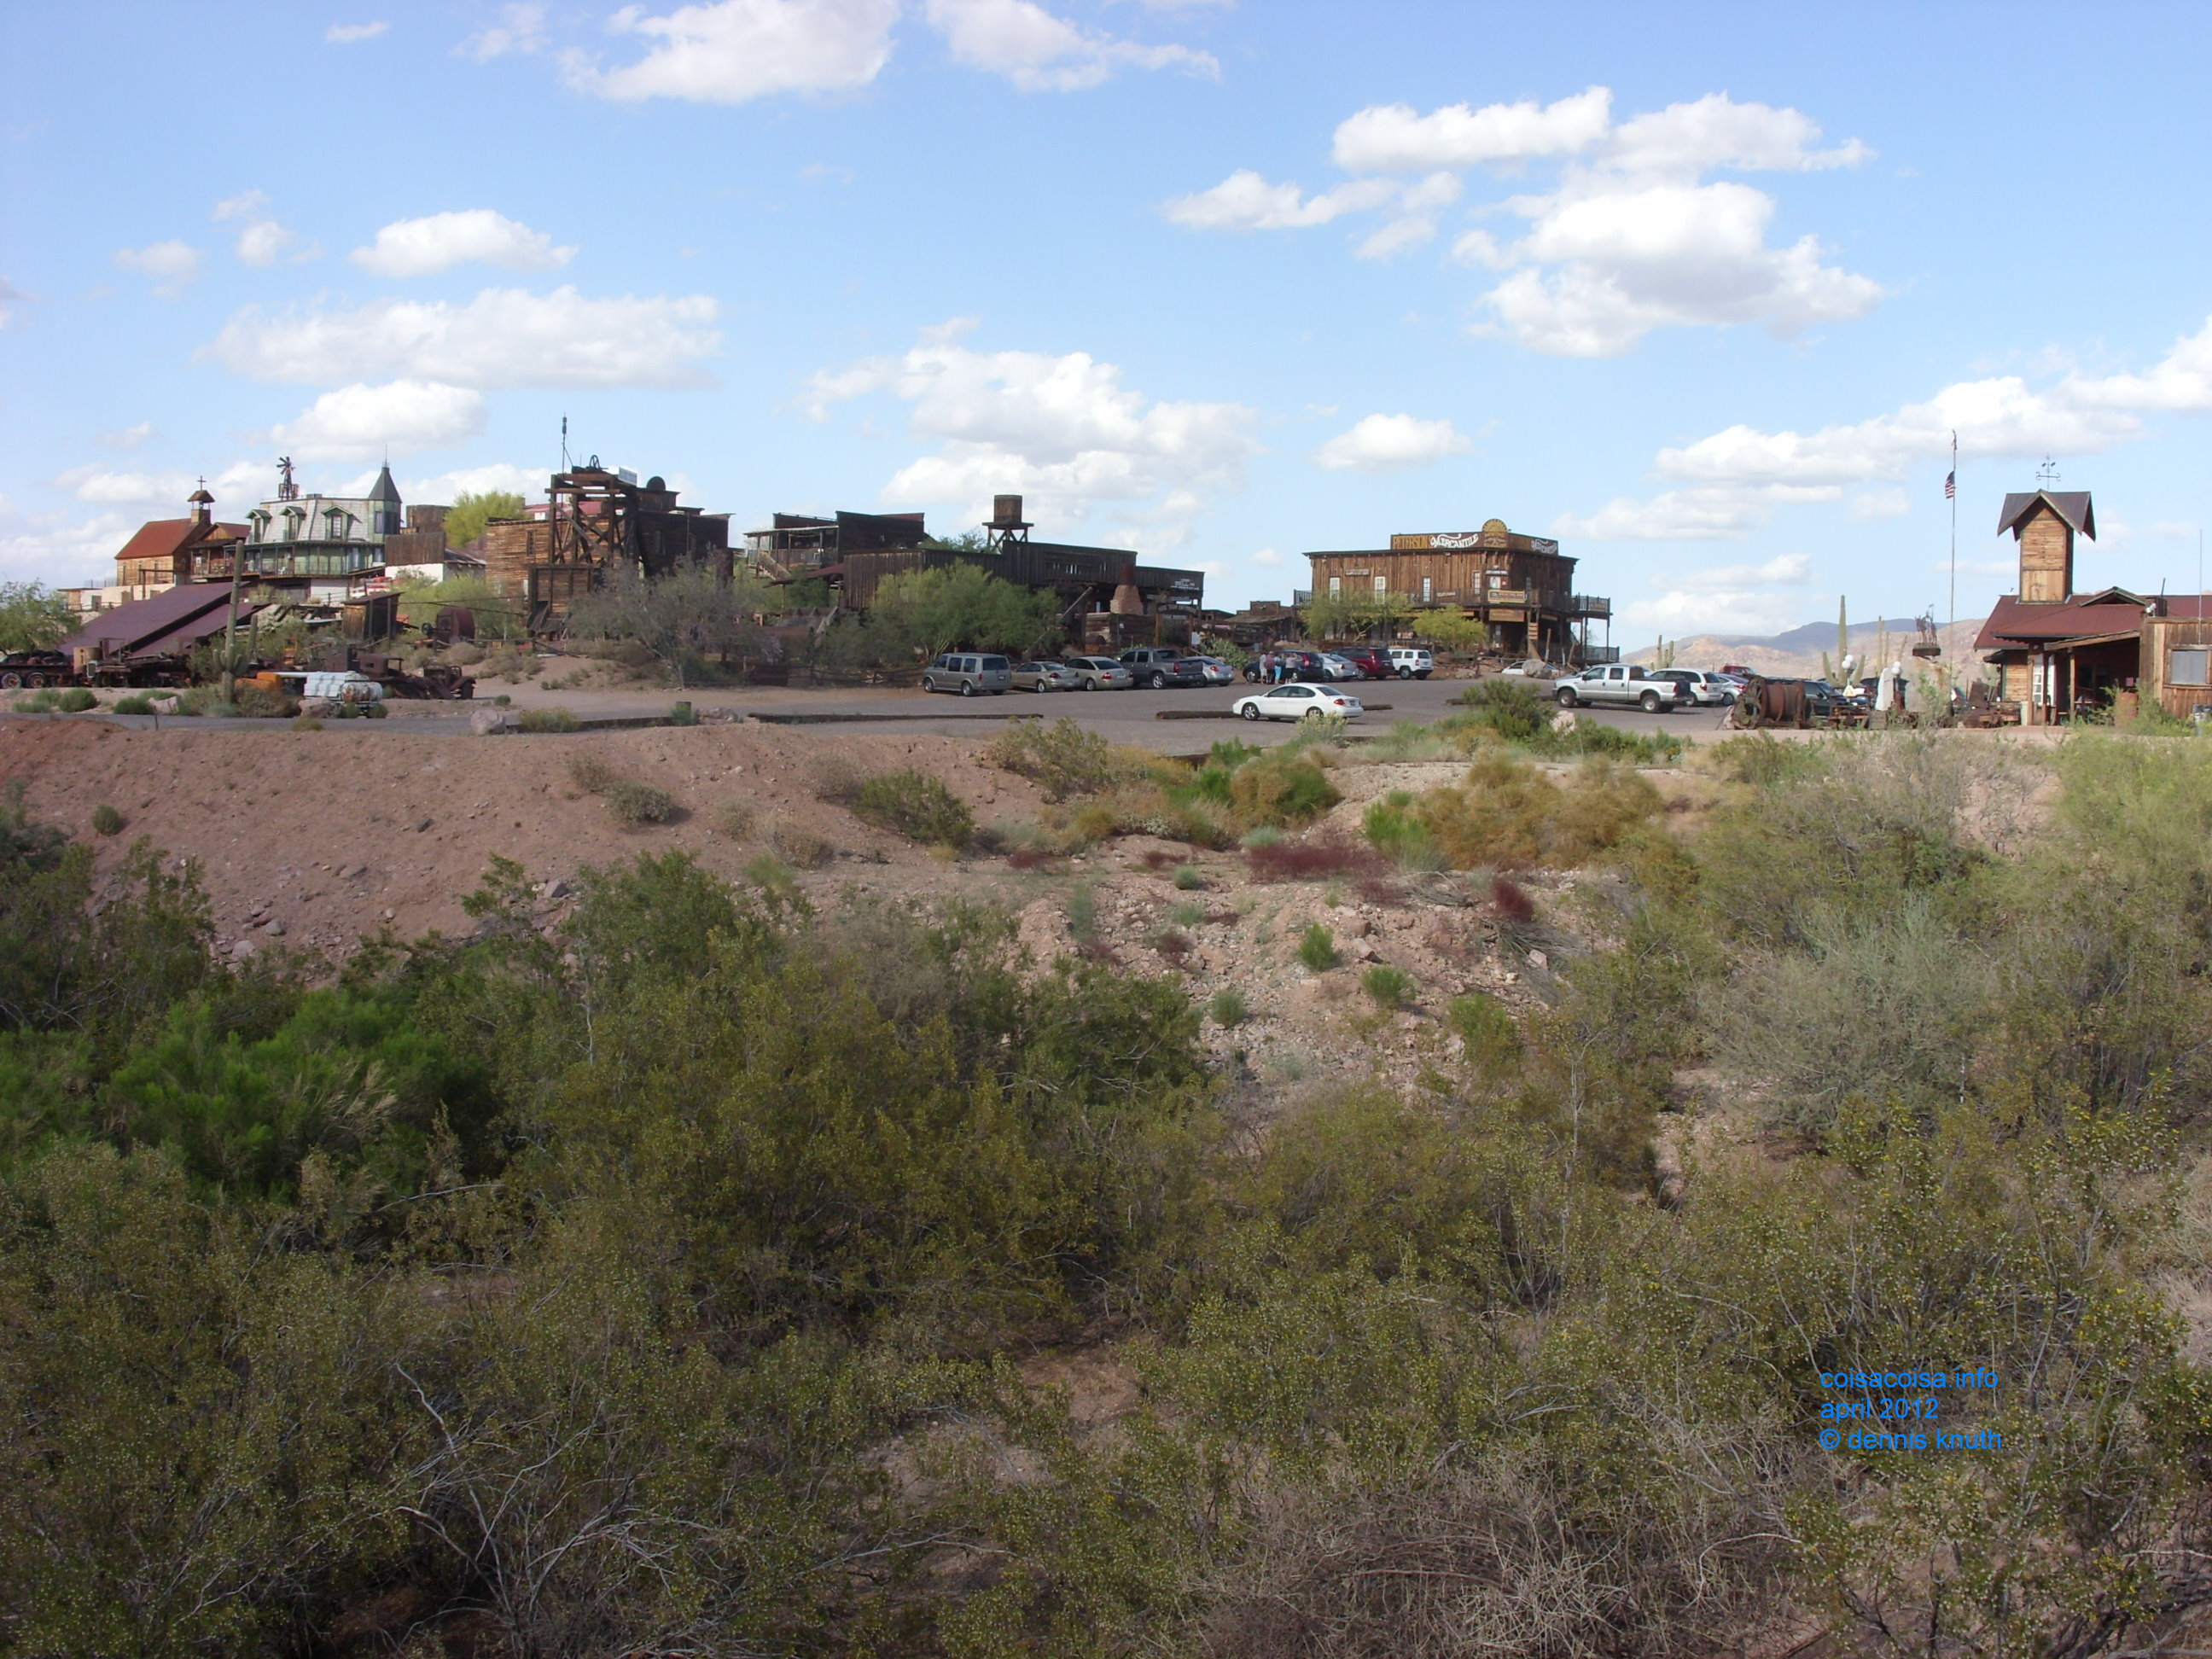 2012_04_26_e_apache_junction_ghost_town_0022.jpg (large)